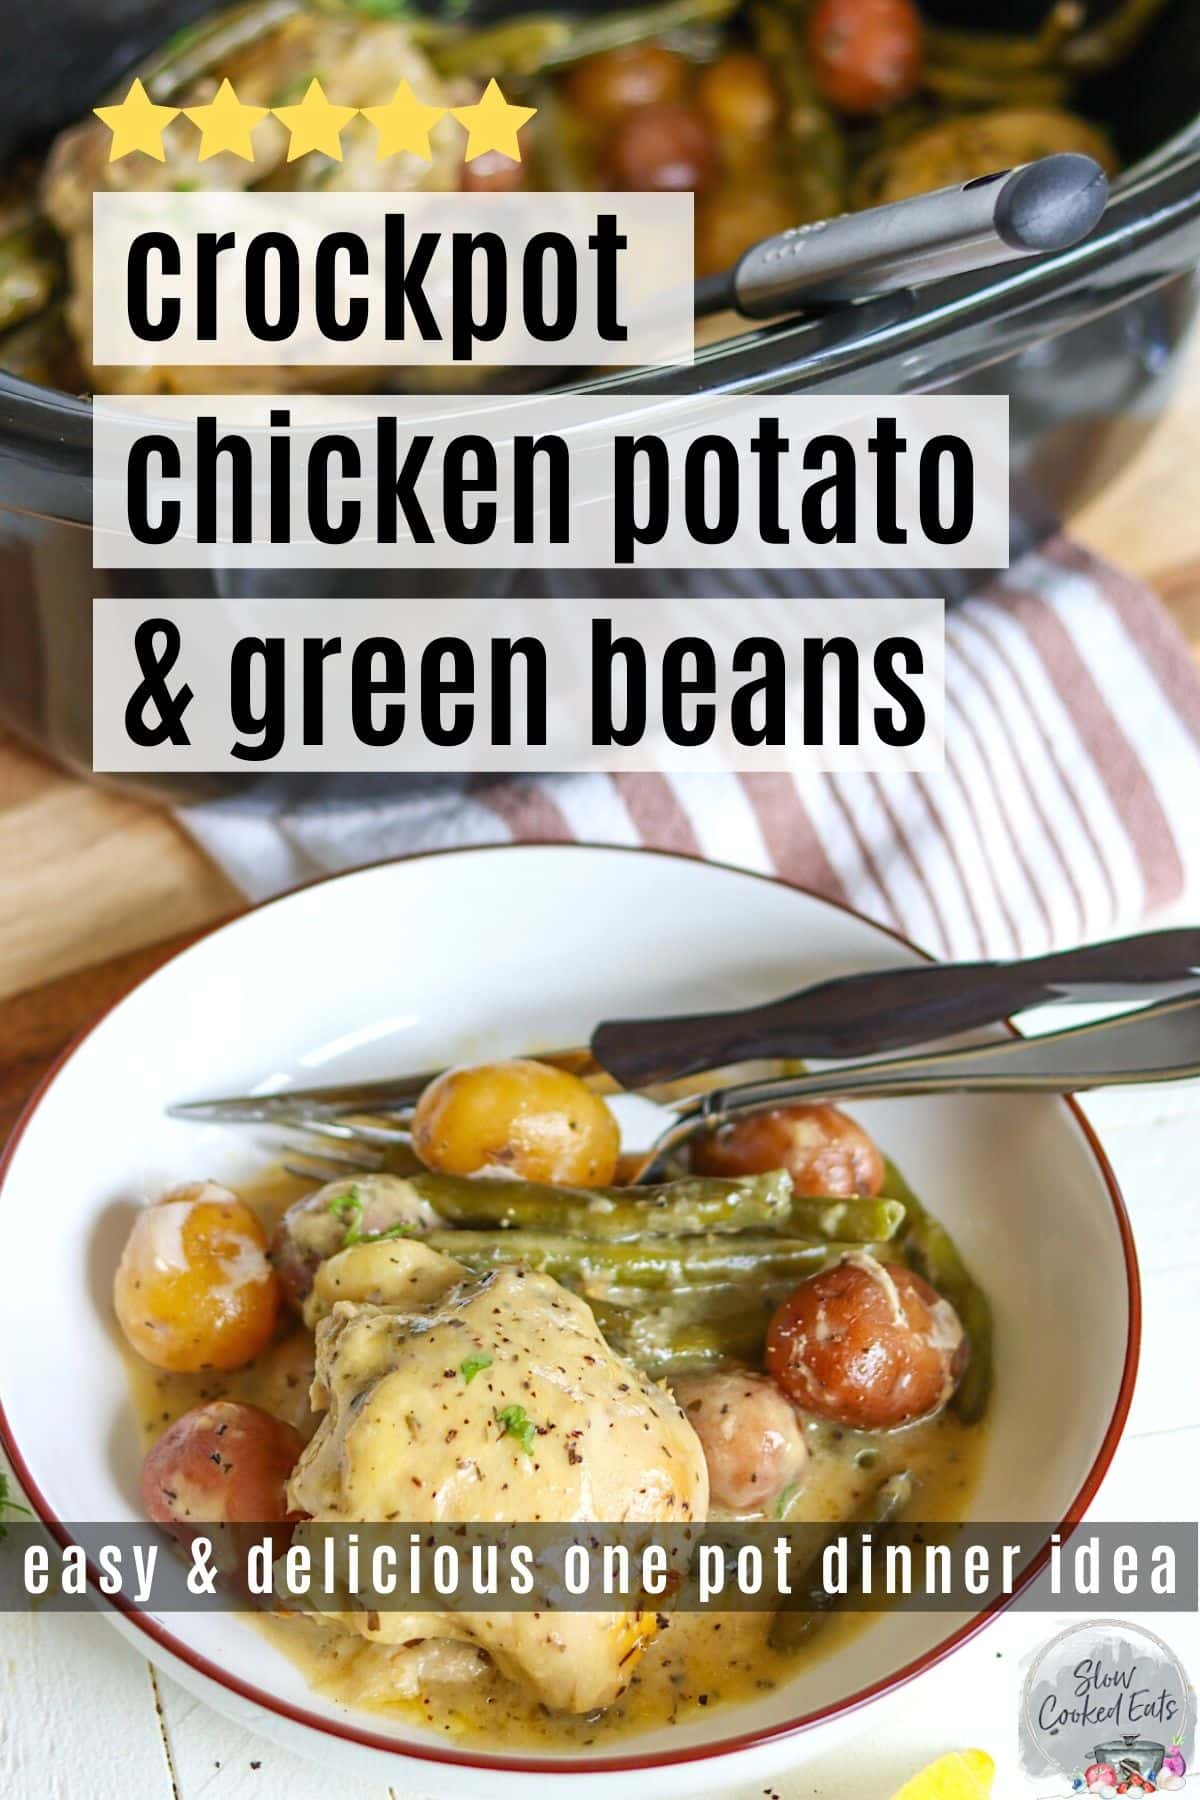 Crockpot chicken potatoes and green beans served in a white bowl with a fork and a knife.